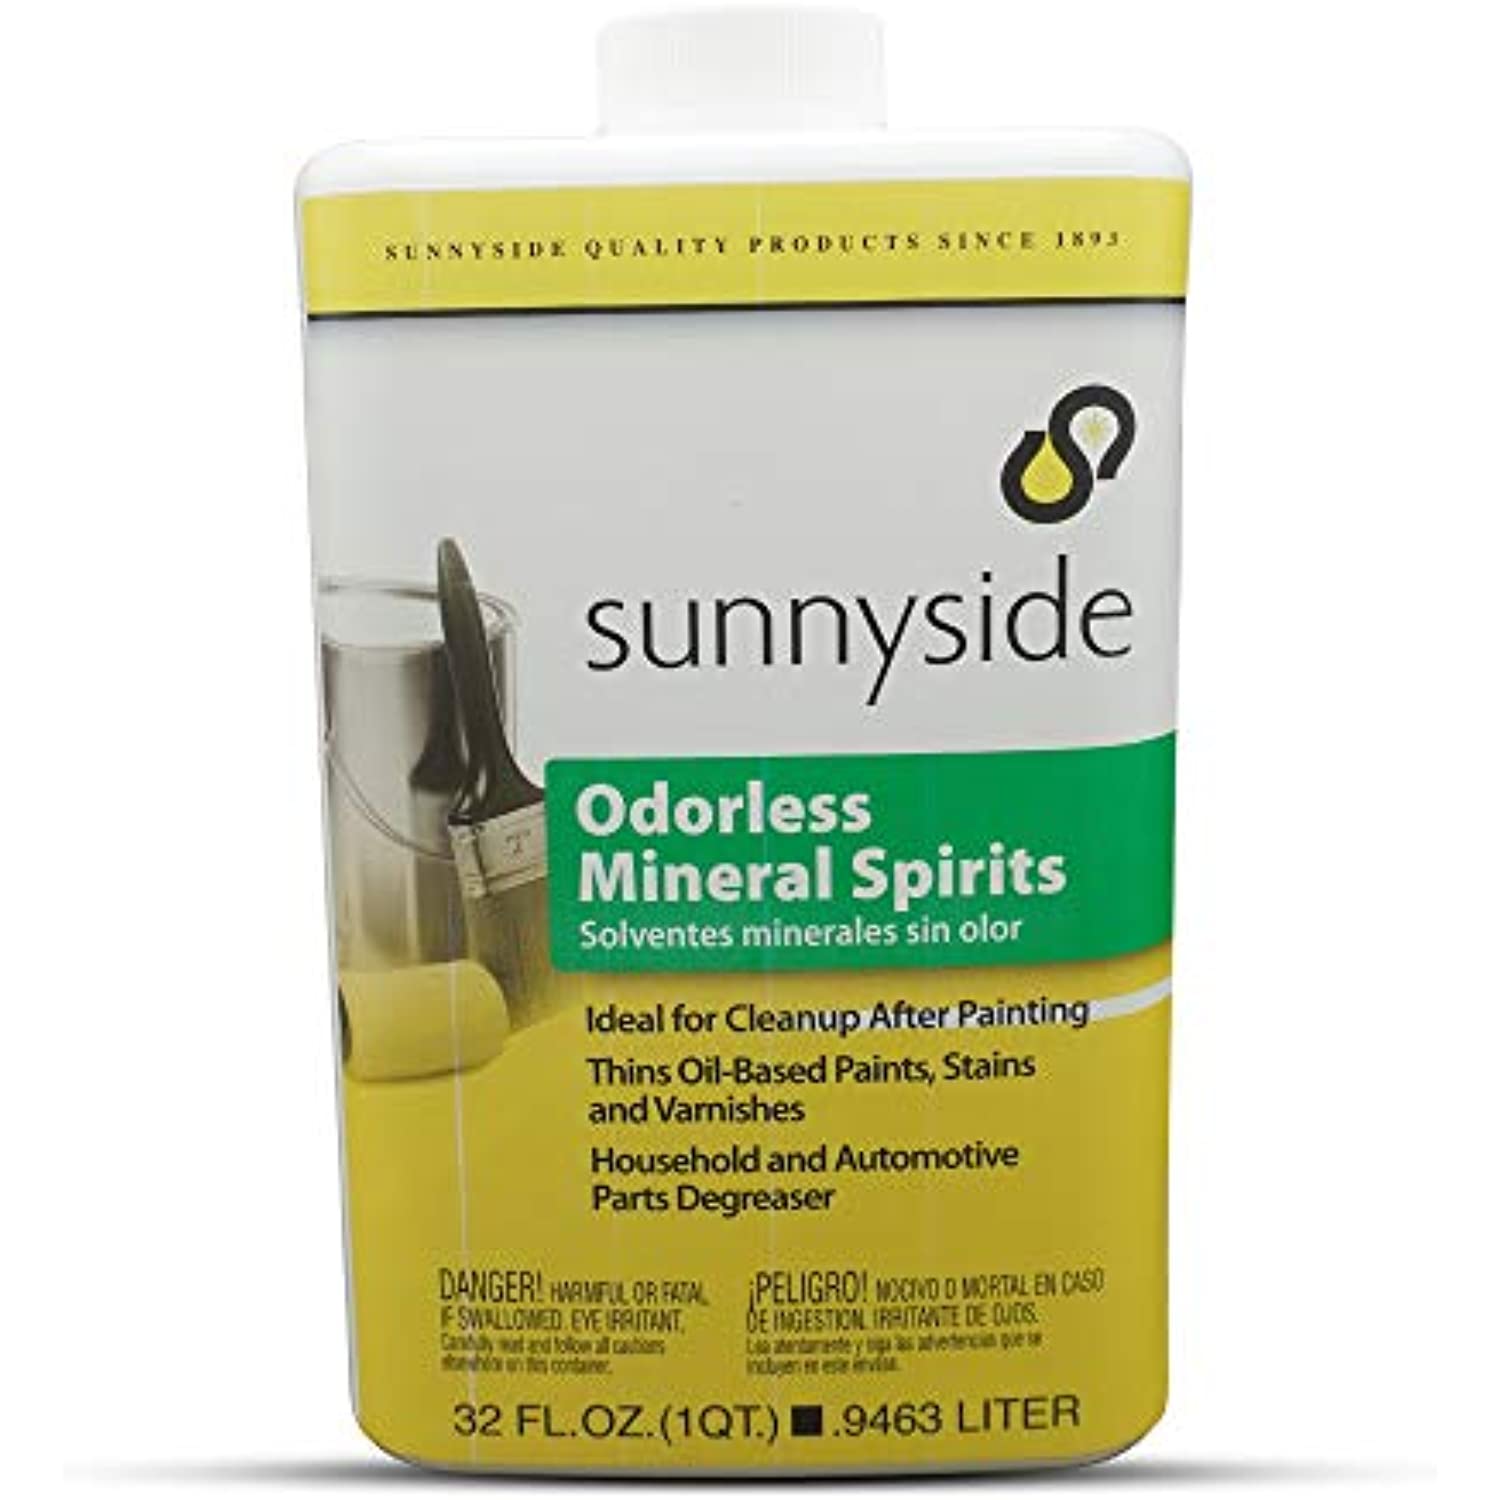 Sunnyside Odorless Mineral Spirit 1 Quart with Centaurus AZ Resistant Glove for Industrial Automotive Hydrocarbon Petroleum Distillate Dirt Grease Oil Equipment Tools Pure Odor-Free No Additives